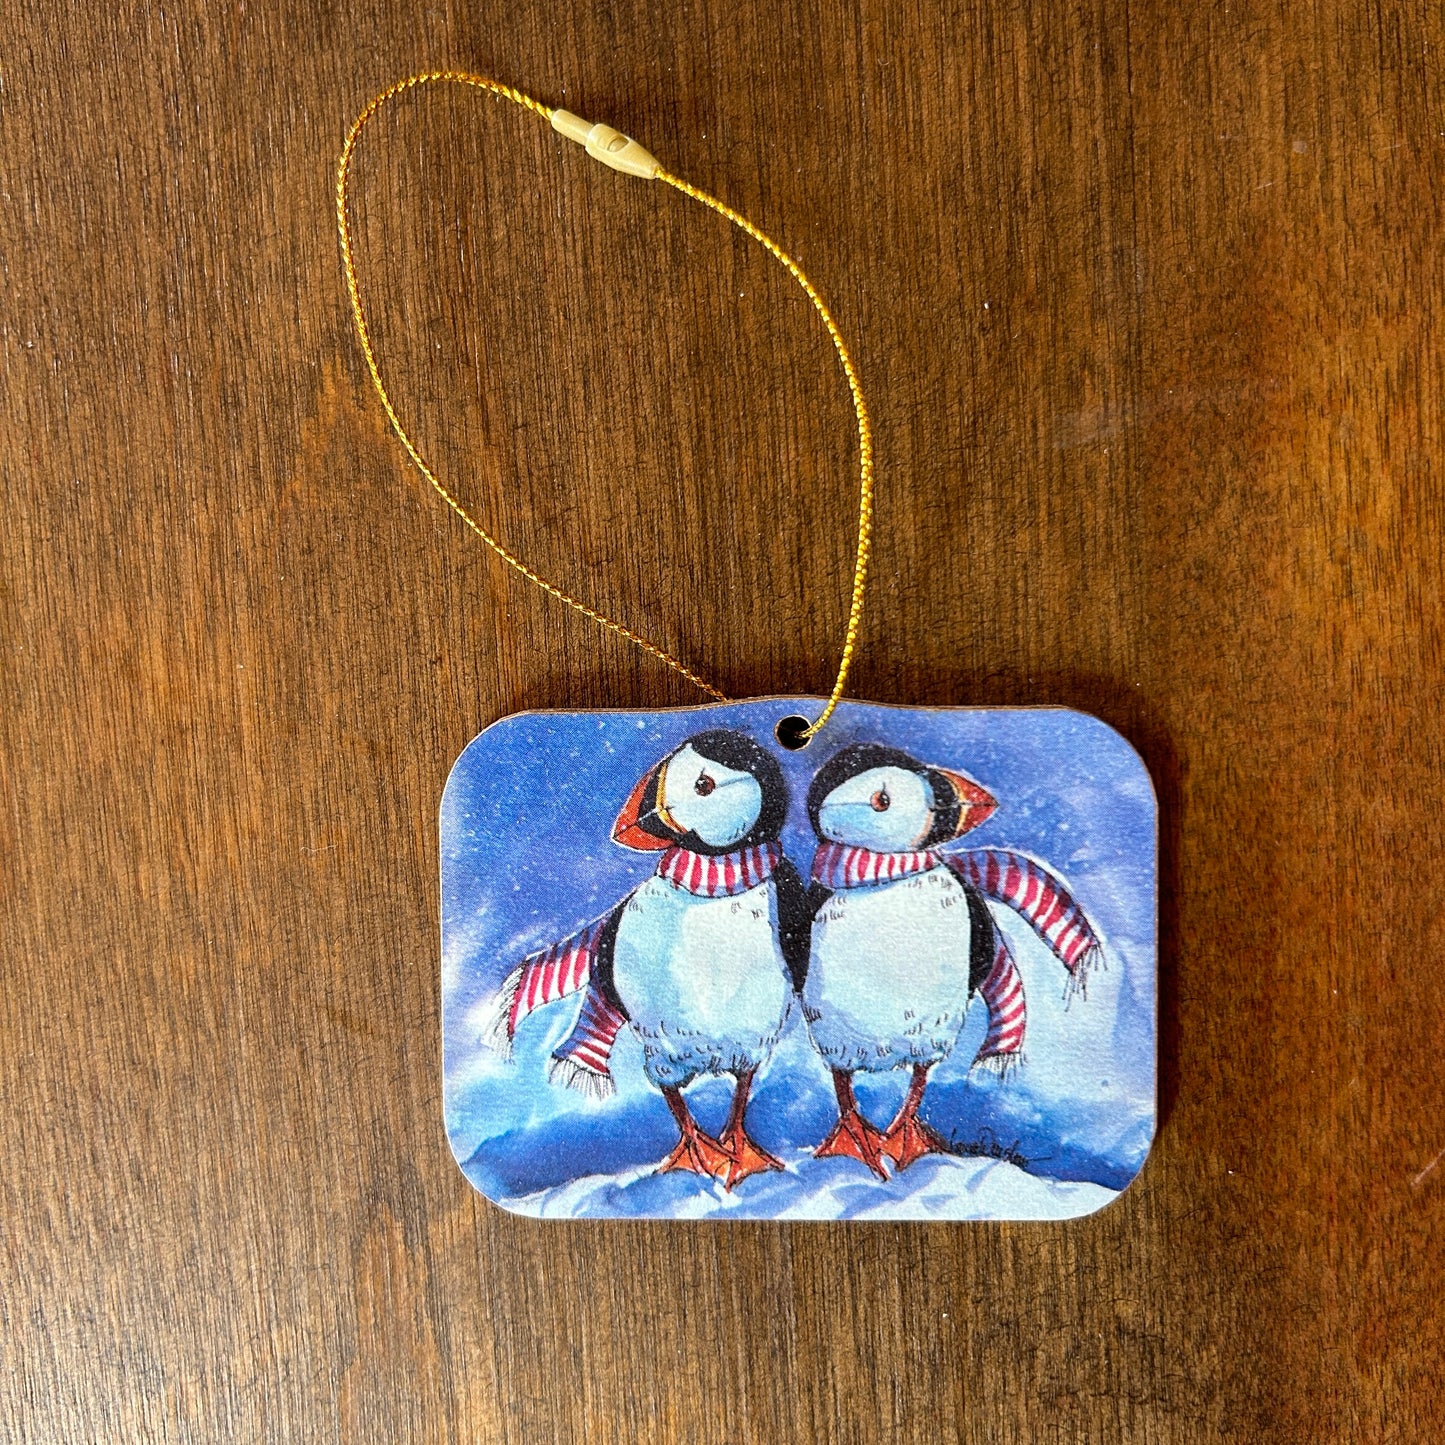 Puffins in candy cane colored scarves ornament